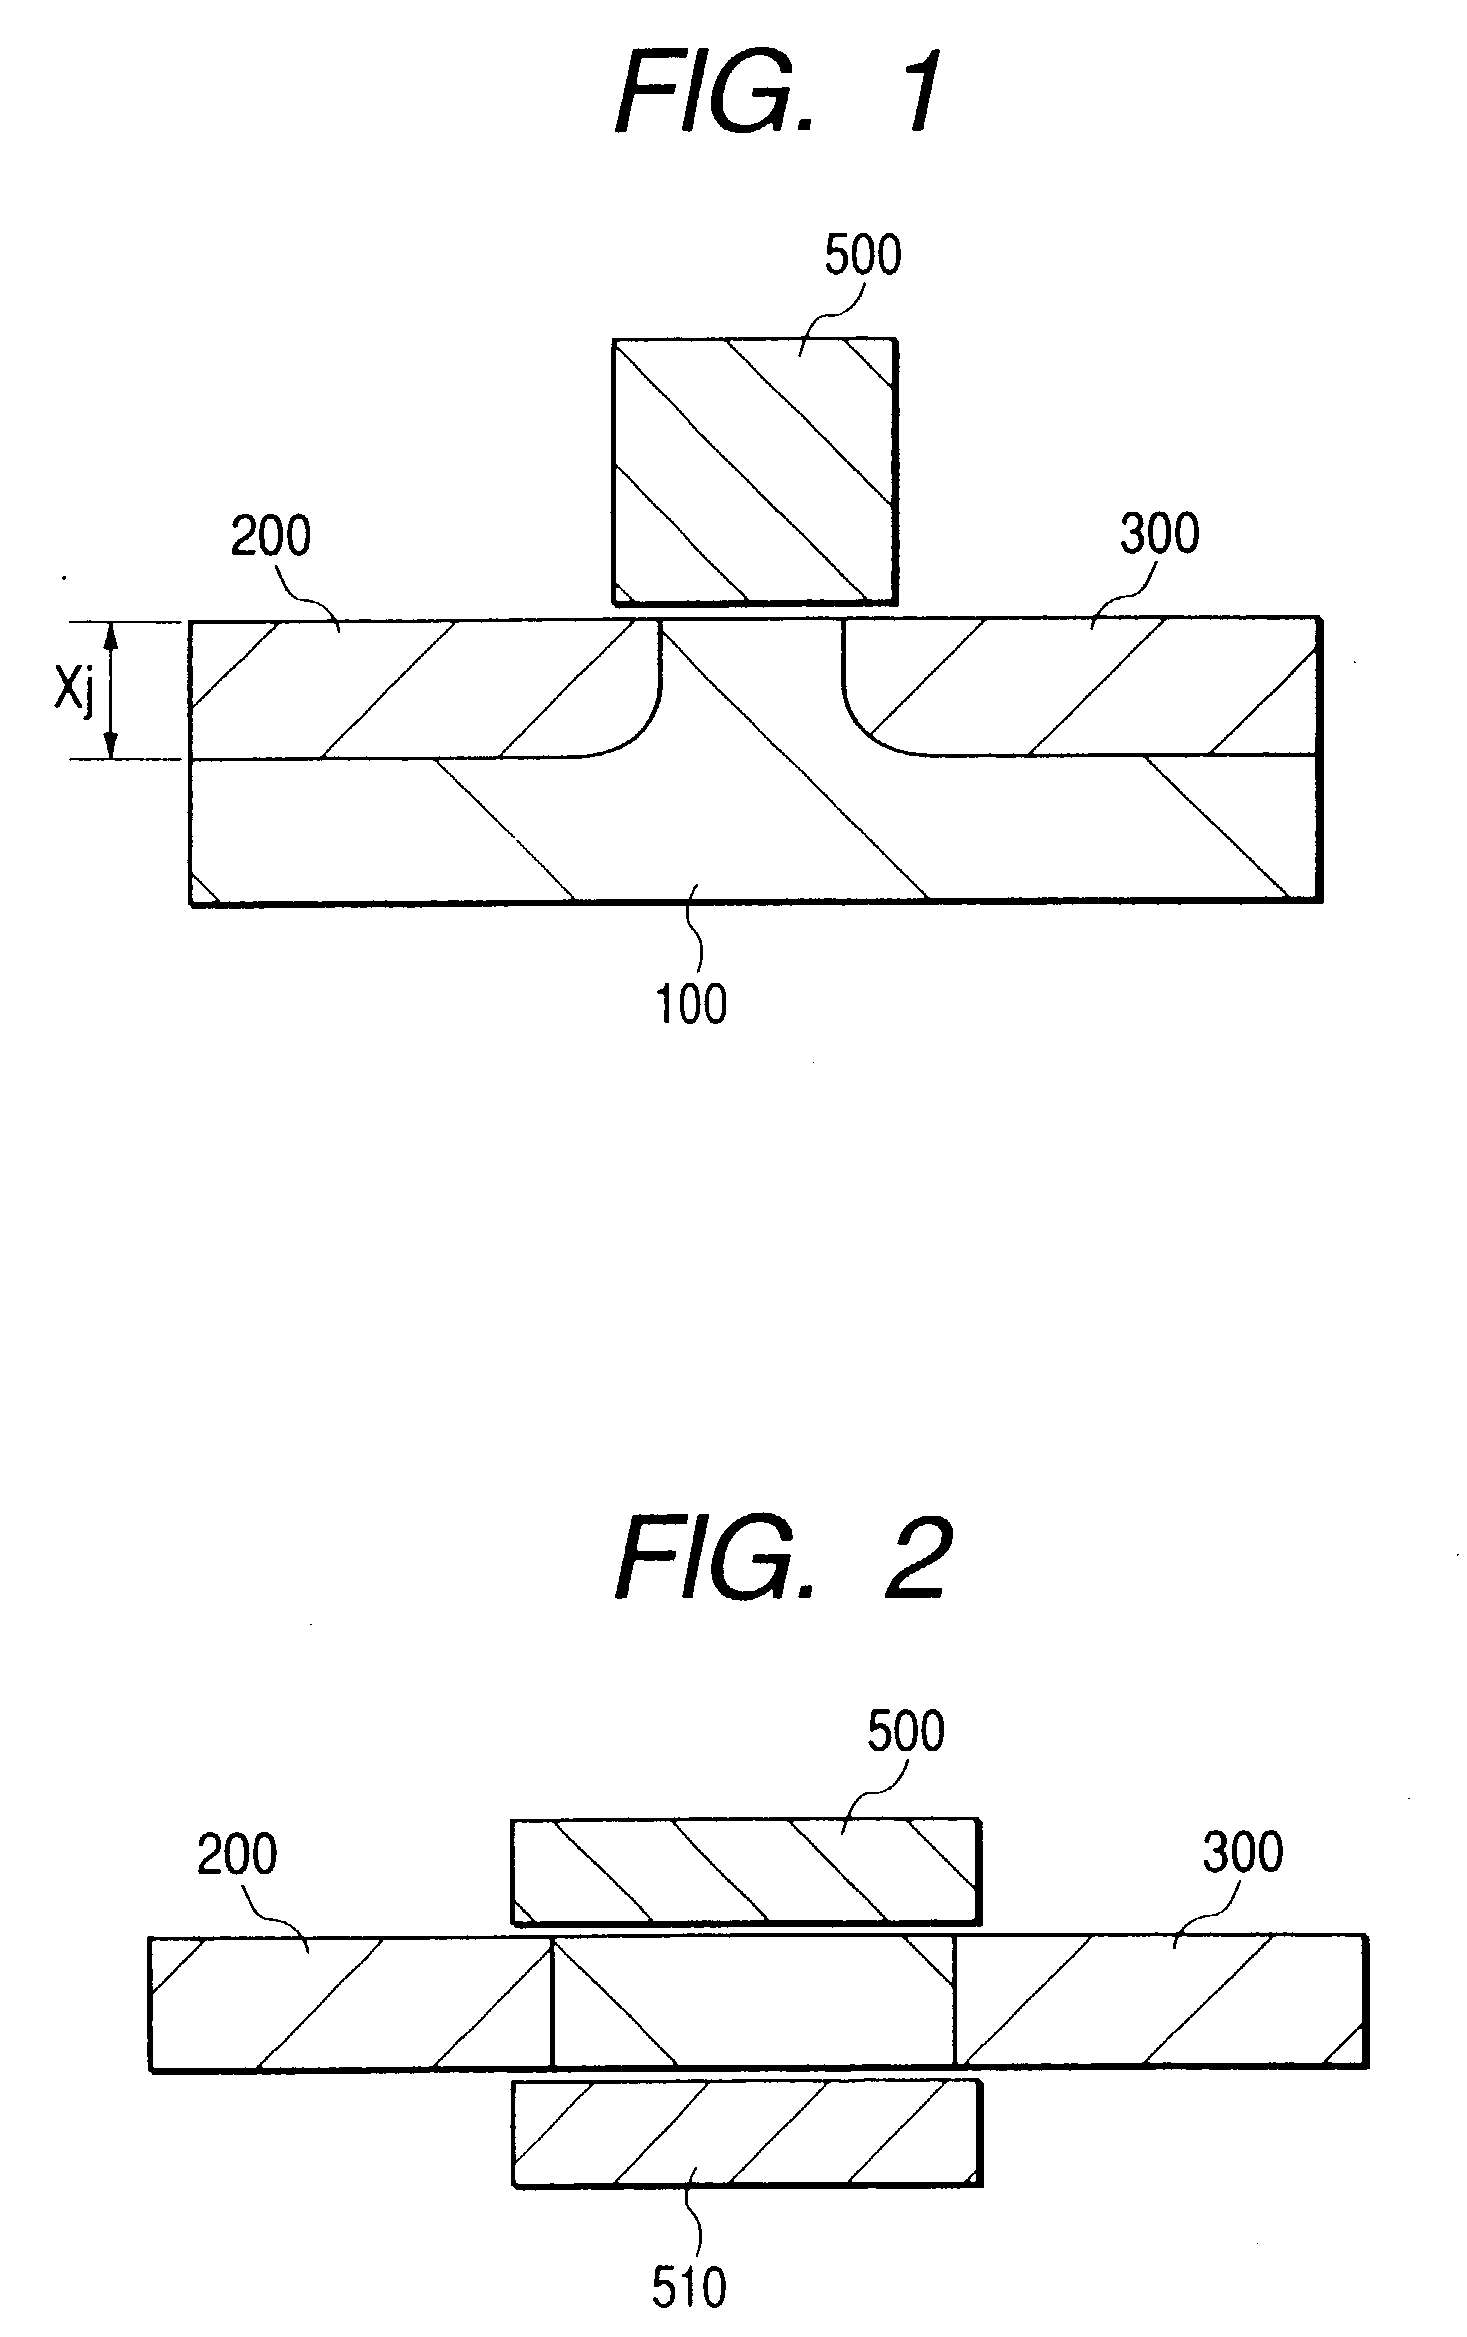 Vertical semiconductor device with tunnel insulator in current path controlled by gate electrode